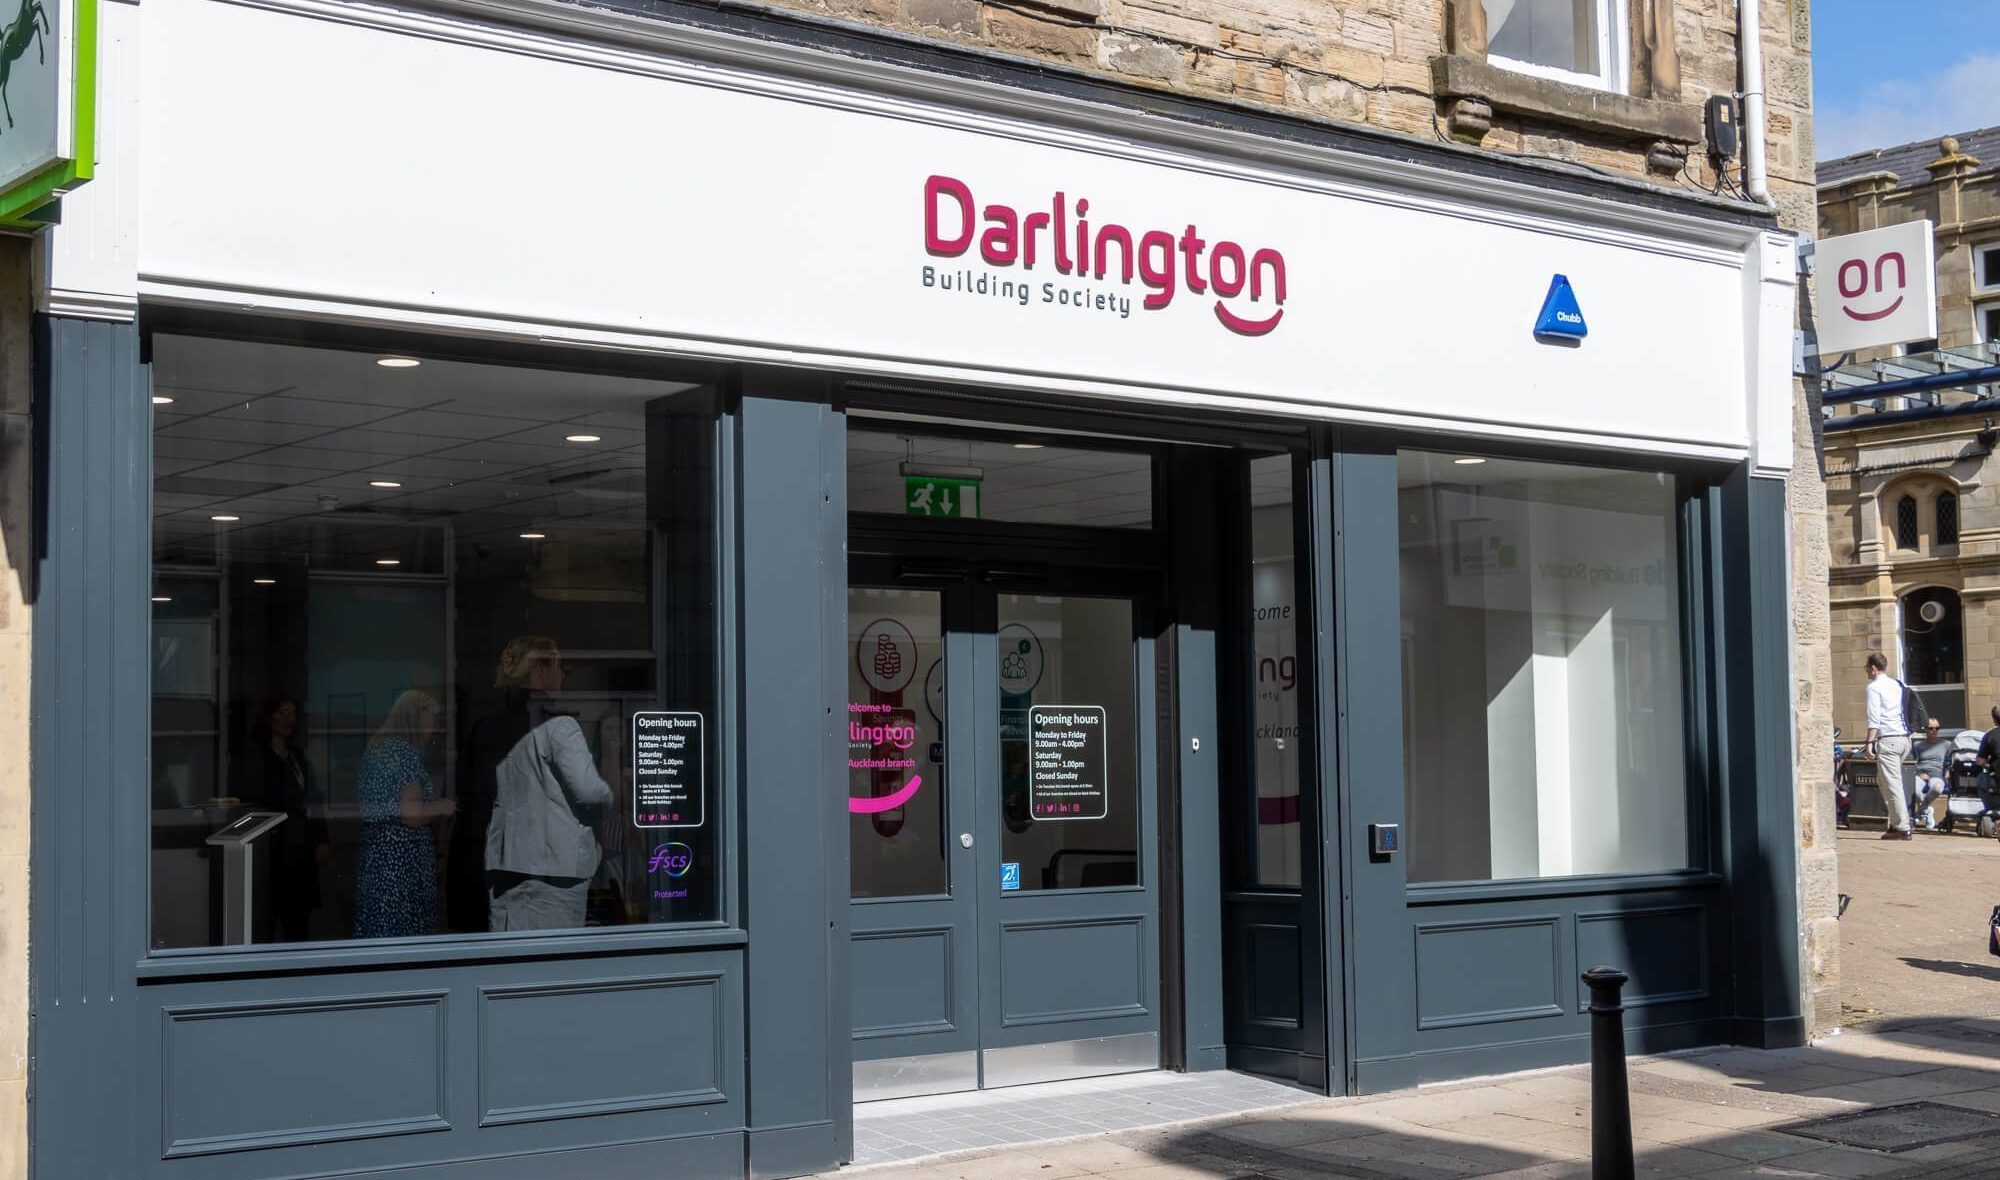 BDN support Darlington Building Society’s high street investment